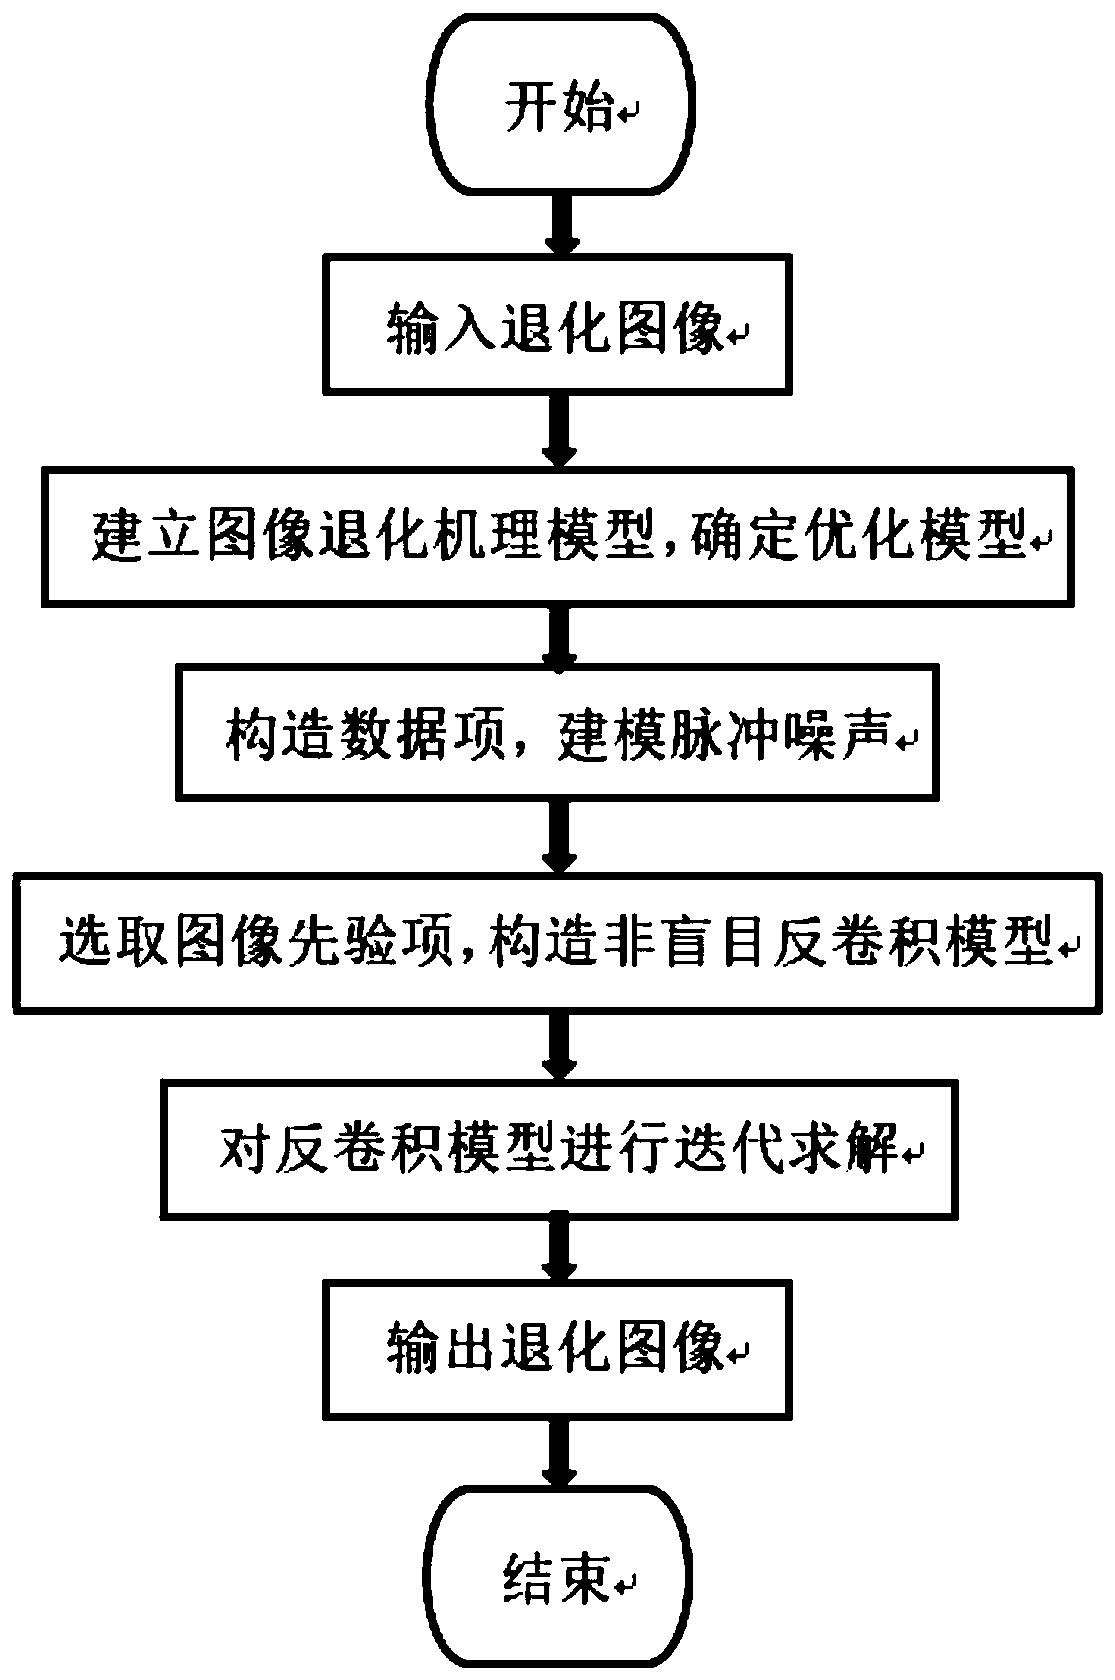 Impulse noise blurred image nonlinear restoration method and system